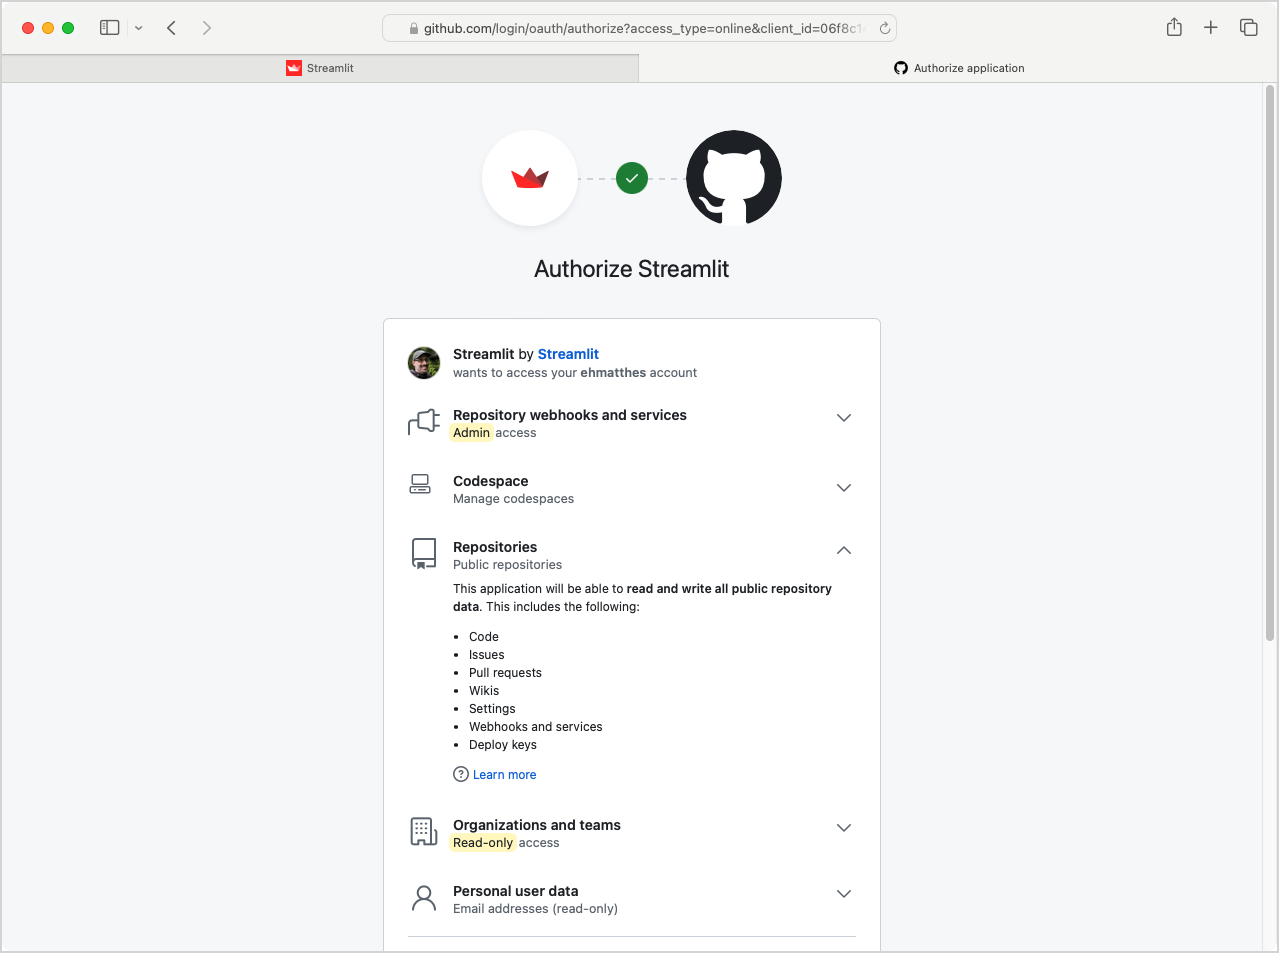 GitHub permissions page, showing that Streamlit is asking for full read/write and admin permissions over all public repos